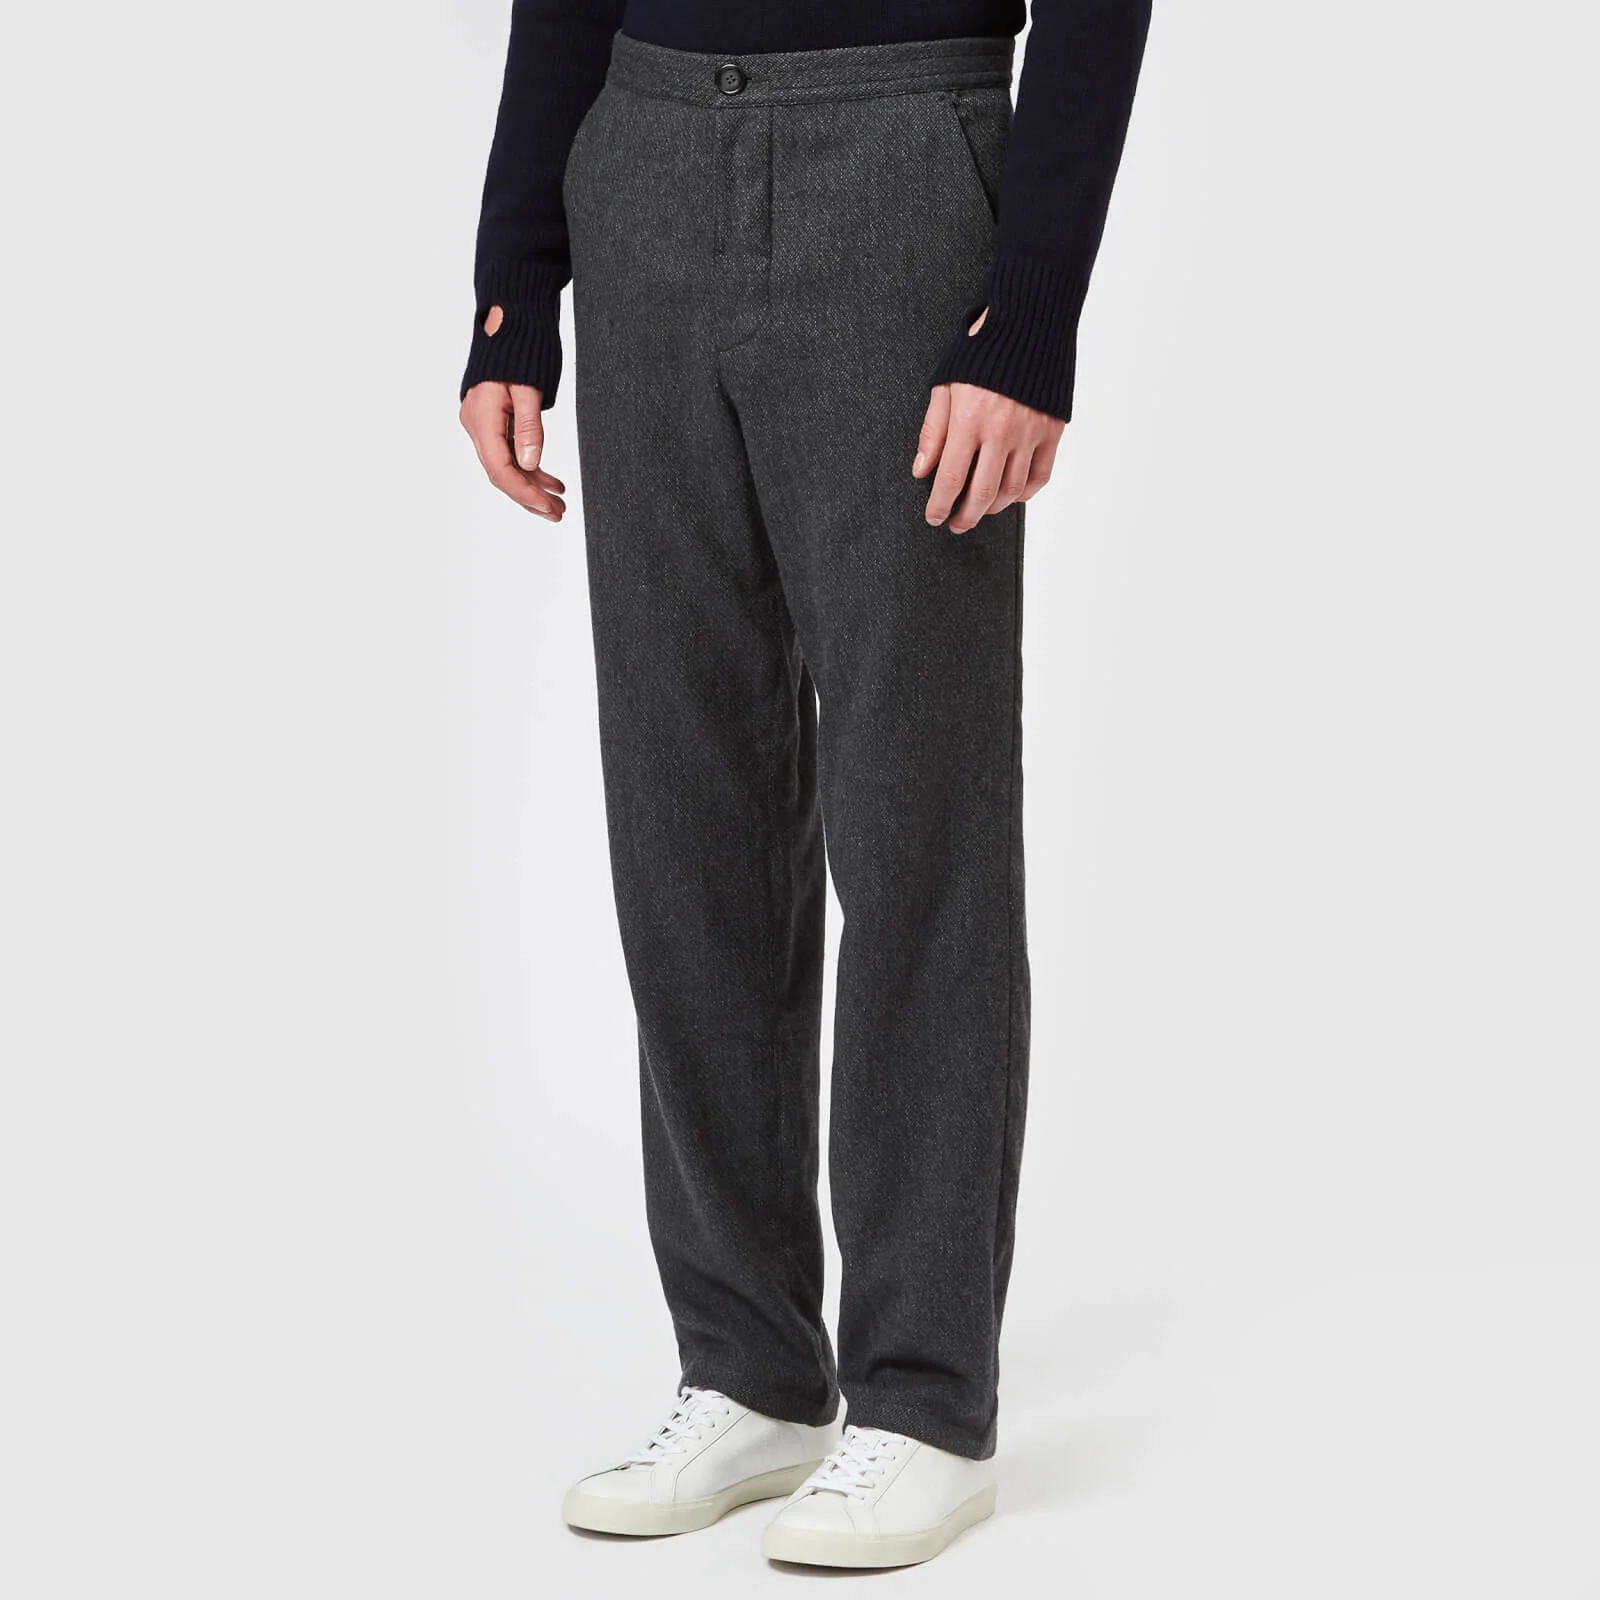 Oliver Spencer Men's Drawstring Trousers - Caldwell Grey Image 1